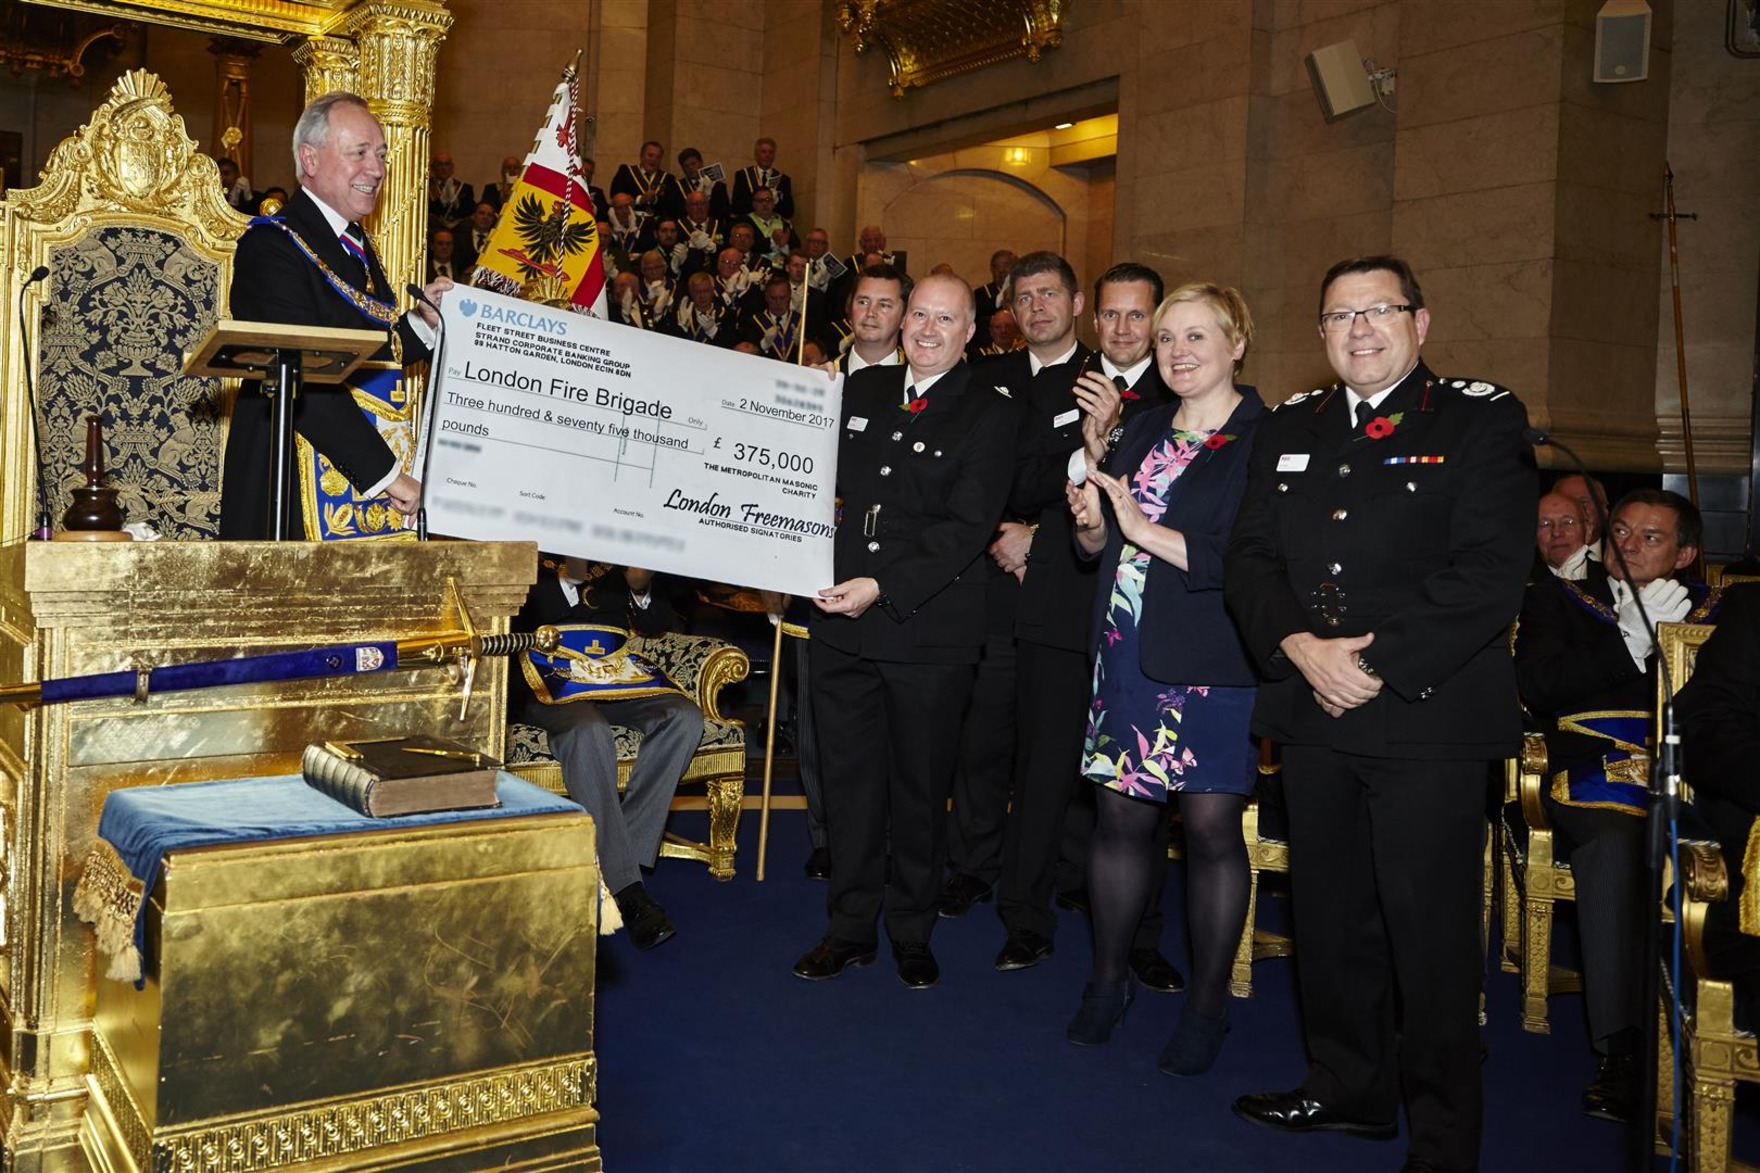 Launch of Fundraising Appeal for London Fire Brigade aerial appliances